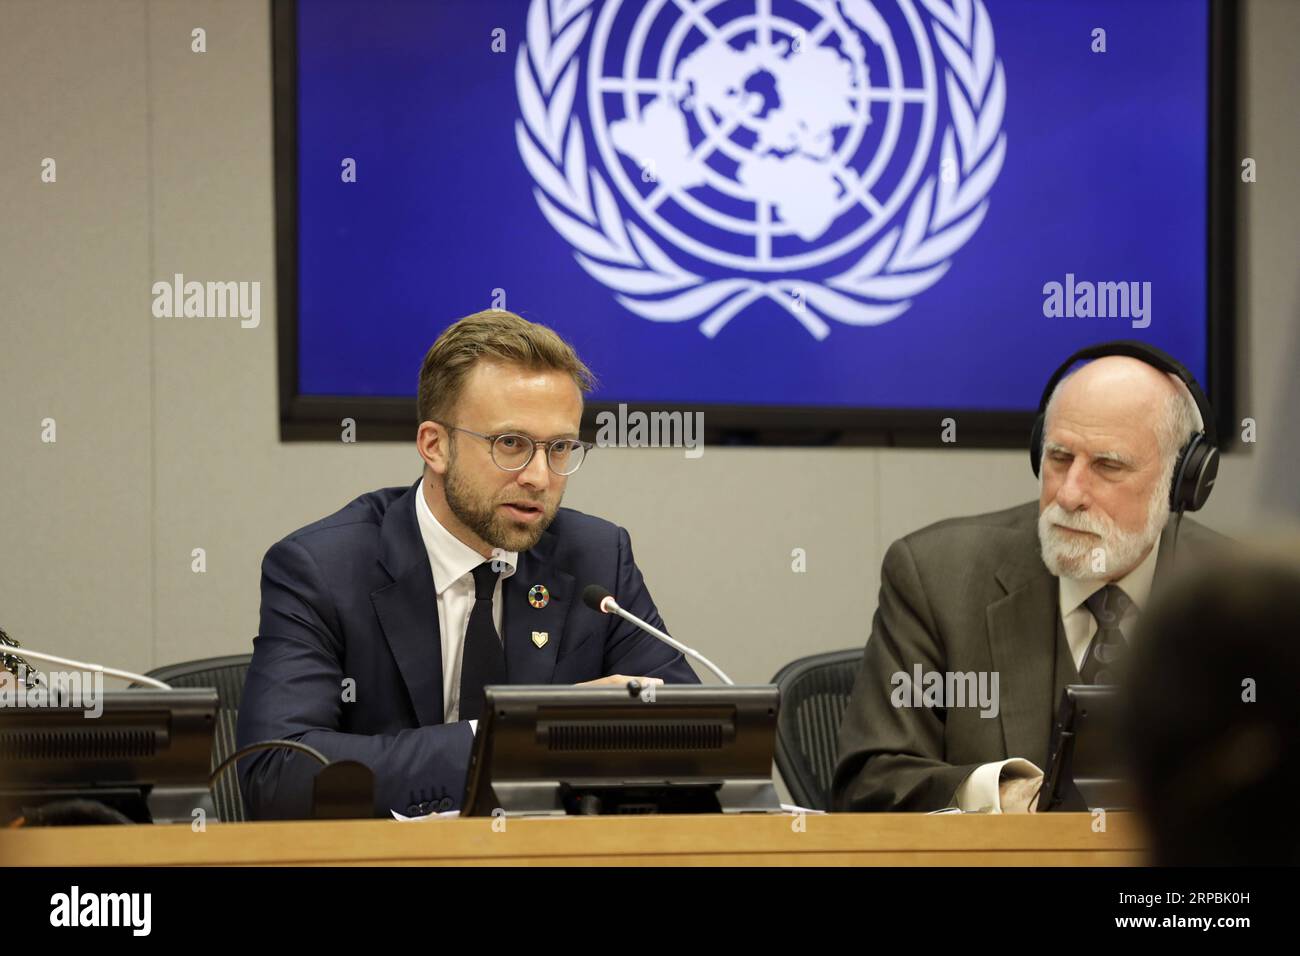 (190610) -- UNITED NATIONS, June 10, 2019 -- Nikolai Astrup (L), Norway s Minister of Digitalization, speaks during a press briefing on the report of the High-level Panel on Digital Cooperation, at the UN headquarters in New York, on June 10, 2019. An expert group appointed by the United Nations called on governments, the private sector and civil society, in its first report released Monday, to work together urgently to maximize the benefits and minimize the harms of digital technologies. ) UN-HIGH-LEVEL PANEL ON DIGITAL COOPERATION-PRESS BRIEFING LixMuzi PUBLICATIONxNOTxINxCHN Stock Photo